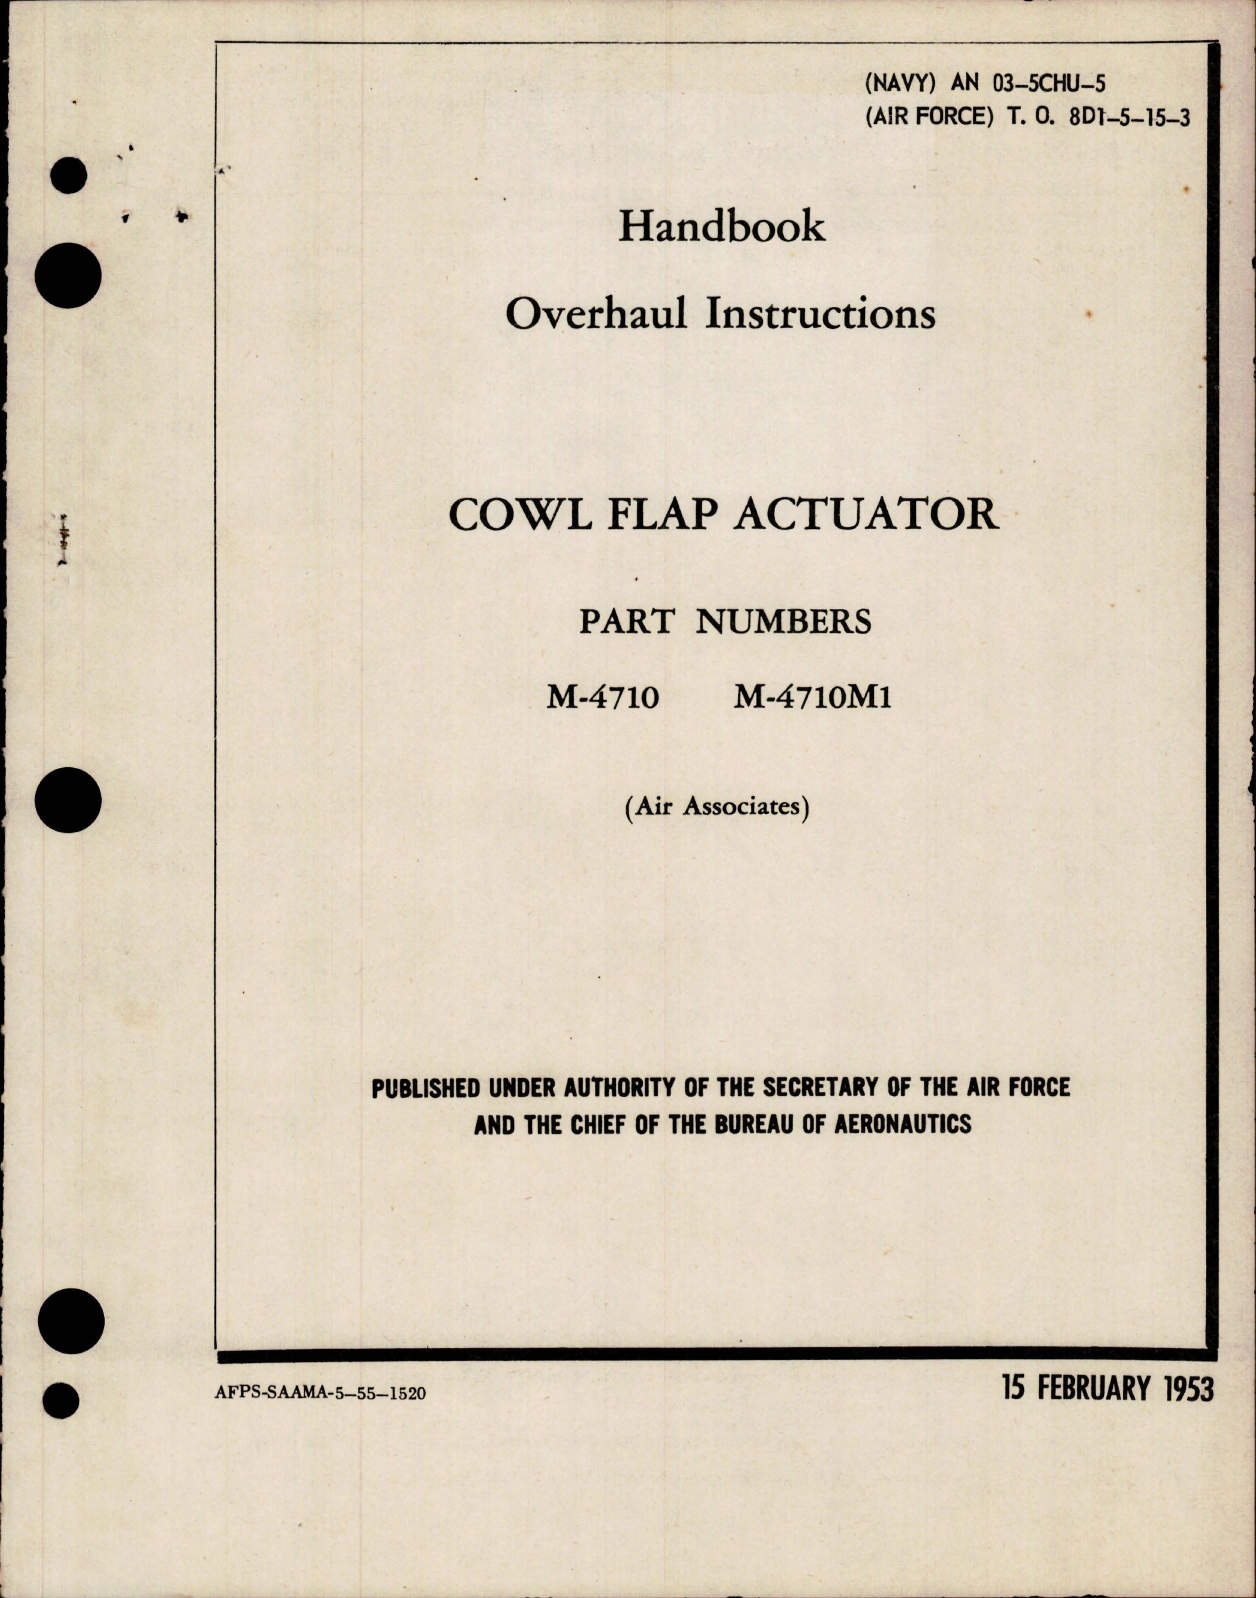 Sample page 1 from AirCorps Library document: Overhaul Instructions for Cowl Flap Actuator - Parts M-4710 and M-4710M1 